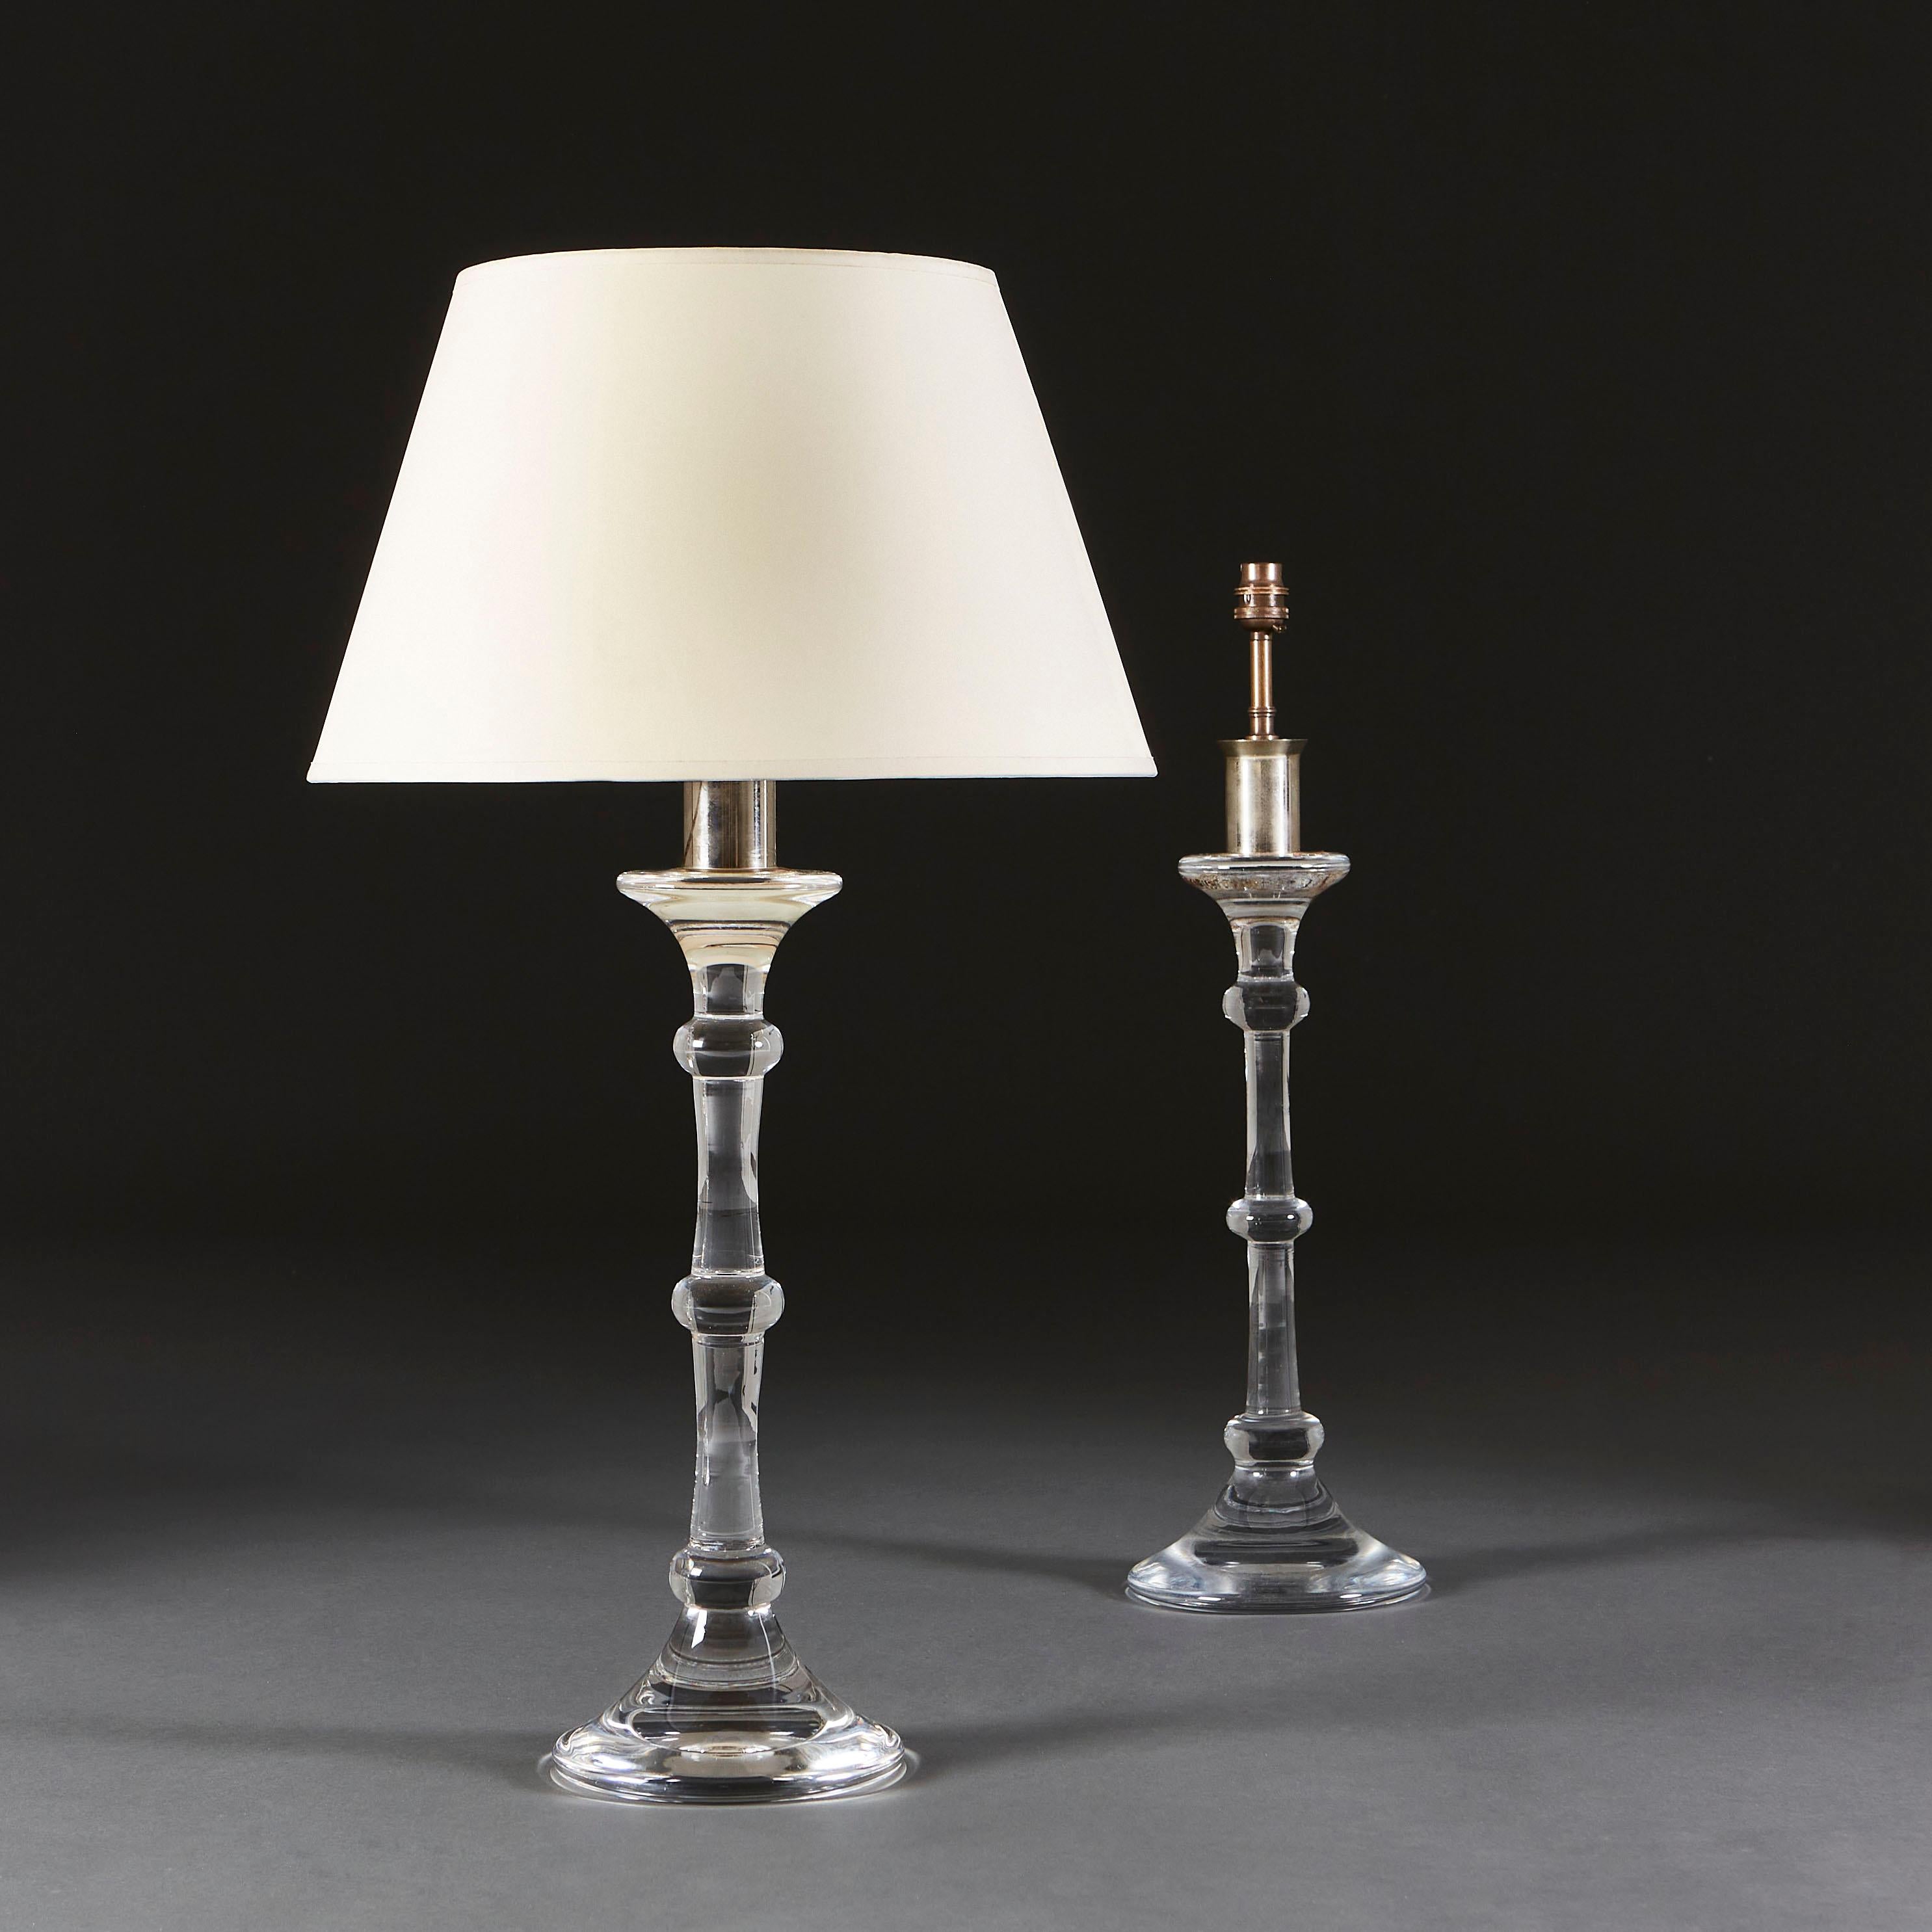 A pair of Val Saint Lambert clear glass column lamps, the stem divided by three bands, with a flared neck and base.

Currently wired for the UK. Please enquire for rewiring services.

Please note: Lampshades not included.